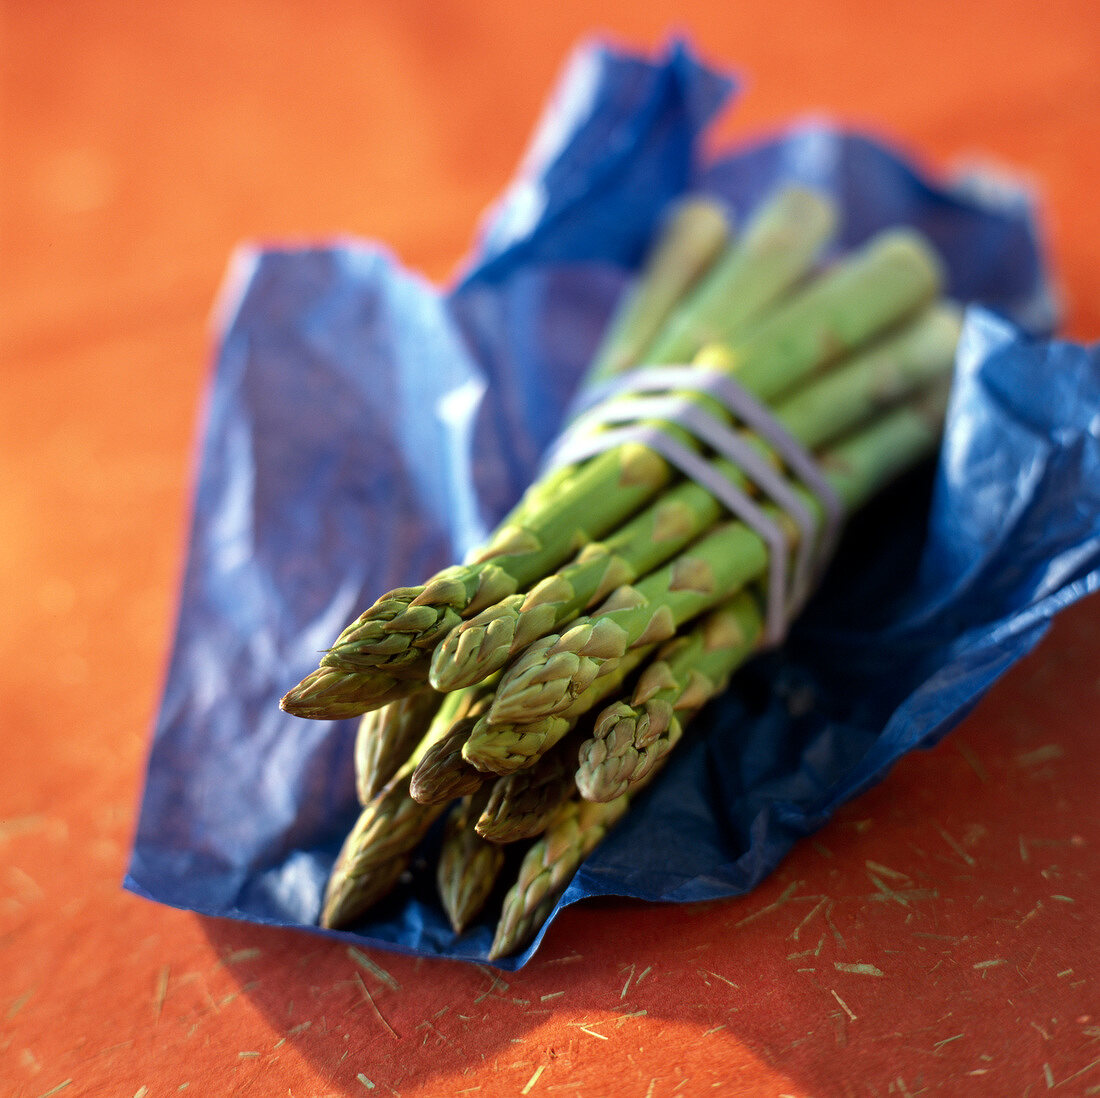 Bunch of green asparagus